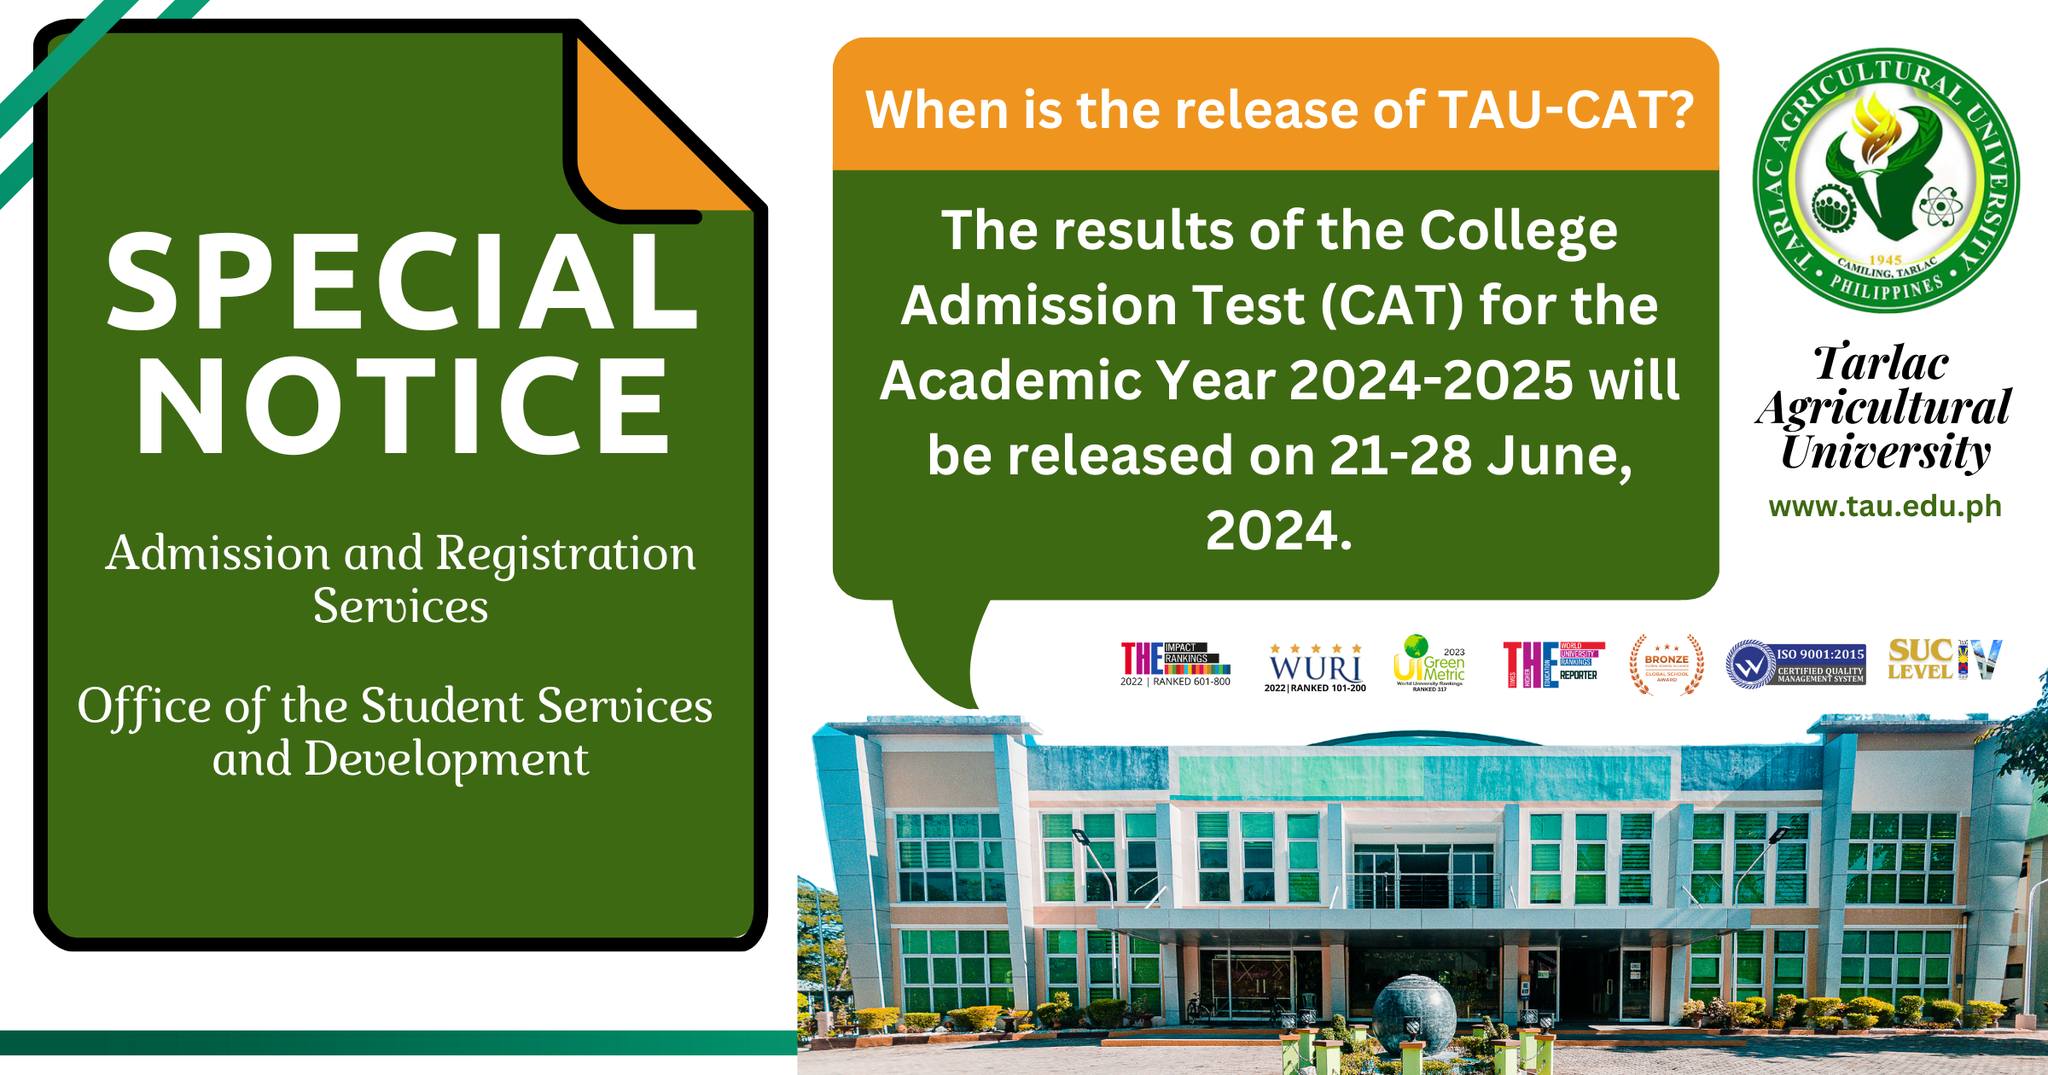 𝐔𝐍𝐈𝐕𝐄𝐑𝐒𝐈𝐓𝐘 𝐁𝐔𝐋𝐋𝐄𝐓𝐈𝐍 | Tarlac Agricultural University College Admission Test (TAU-CAT) results for the 2024-2025 Academic Year will be available from 𝟐𝟏 to 𝐉𝐮𝐧𝐞 𝟐𝟖, 𝟐𝟎𝟐𝟒